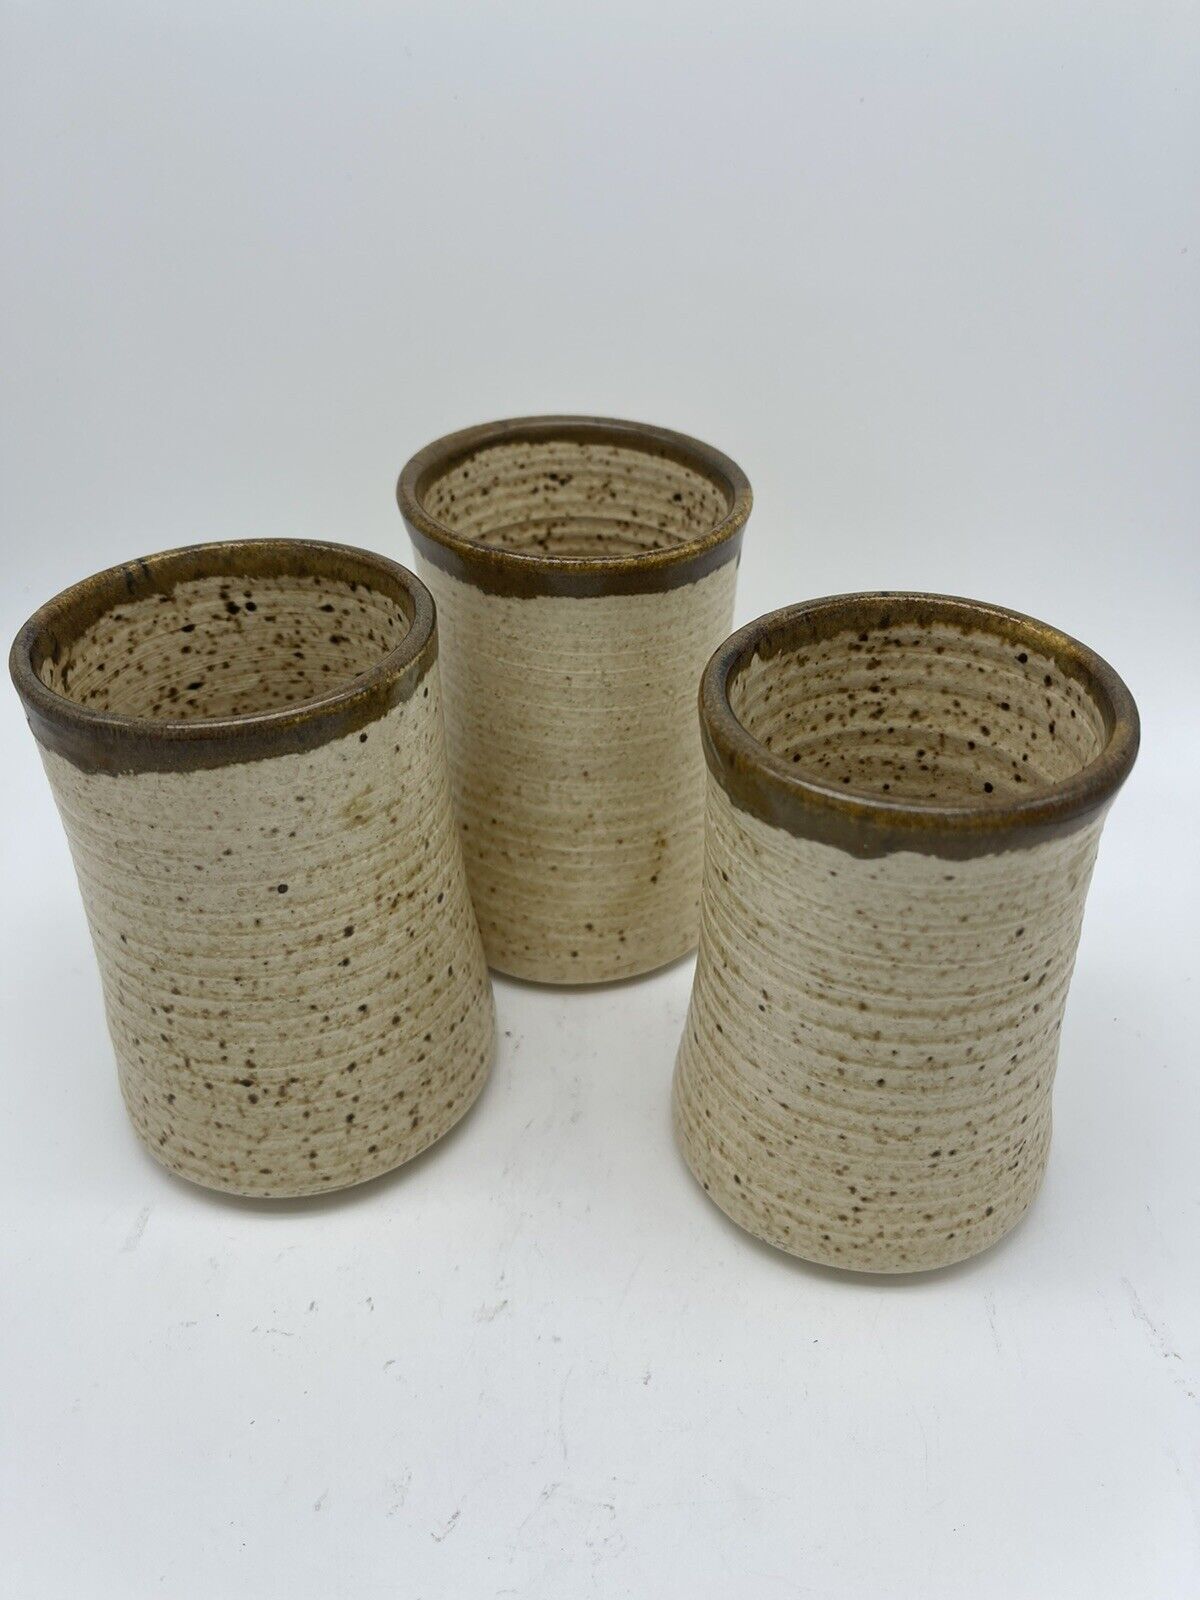 Pottery By Robert Duncan Handthrown Cups 3 Pc Set Smooth Stone 4” Tall MINT